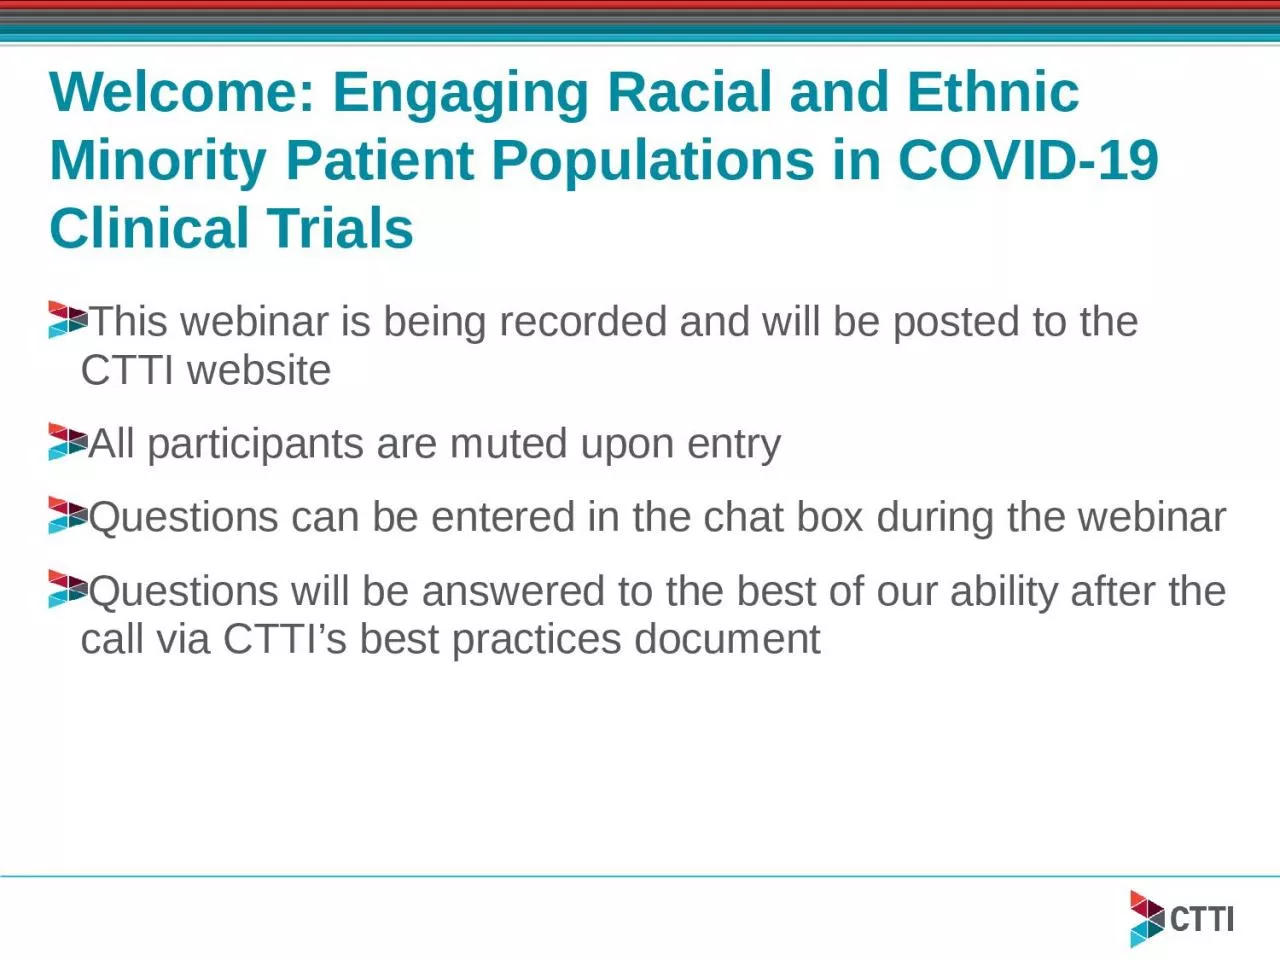 Welcome: Engaging Racial and Ethnic Minority Patient Populations in COVID-19 Clinical